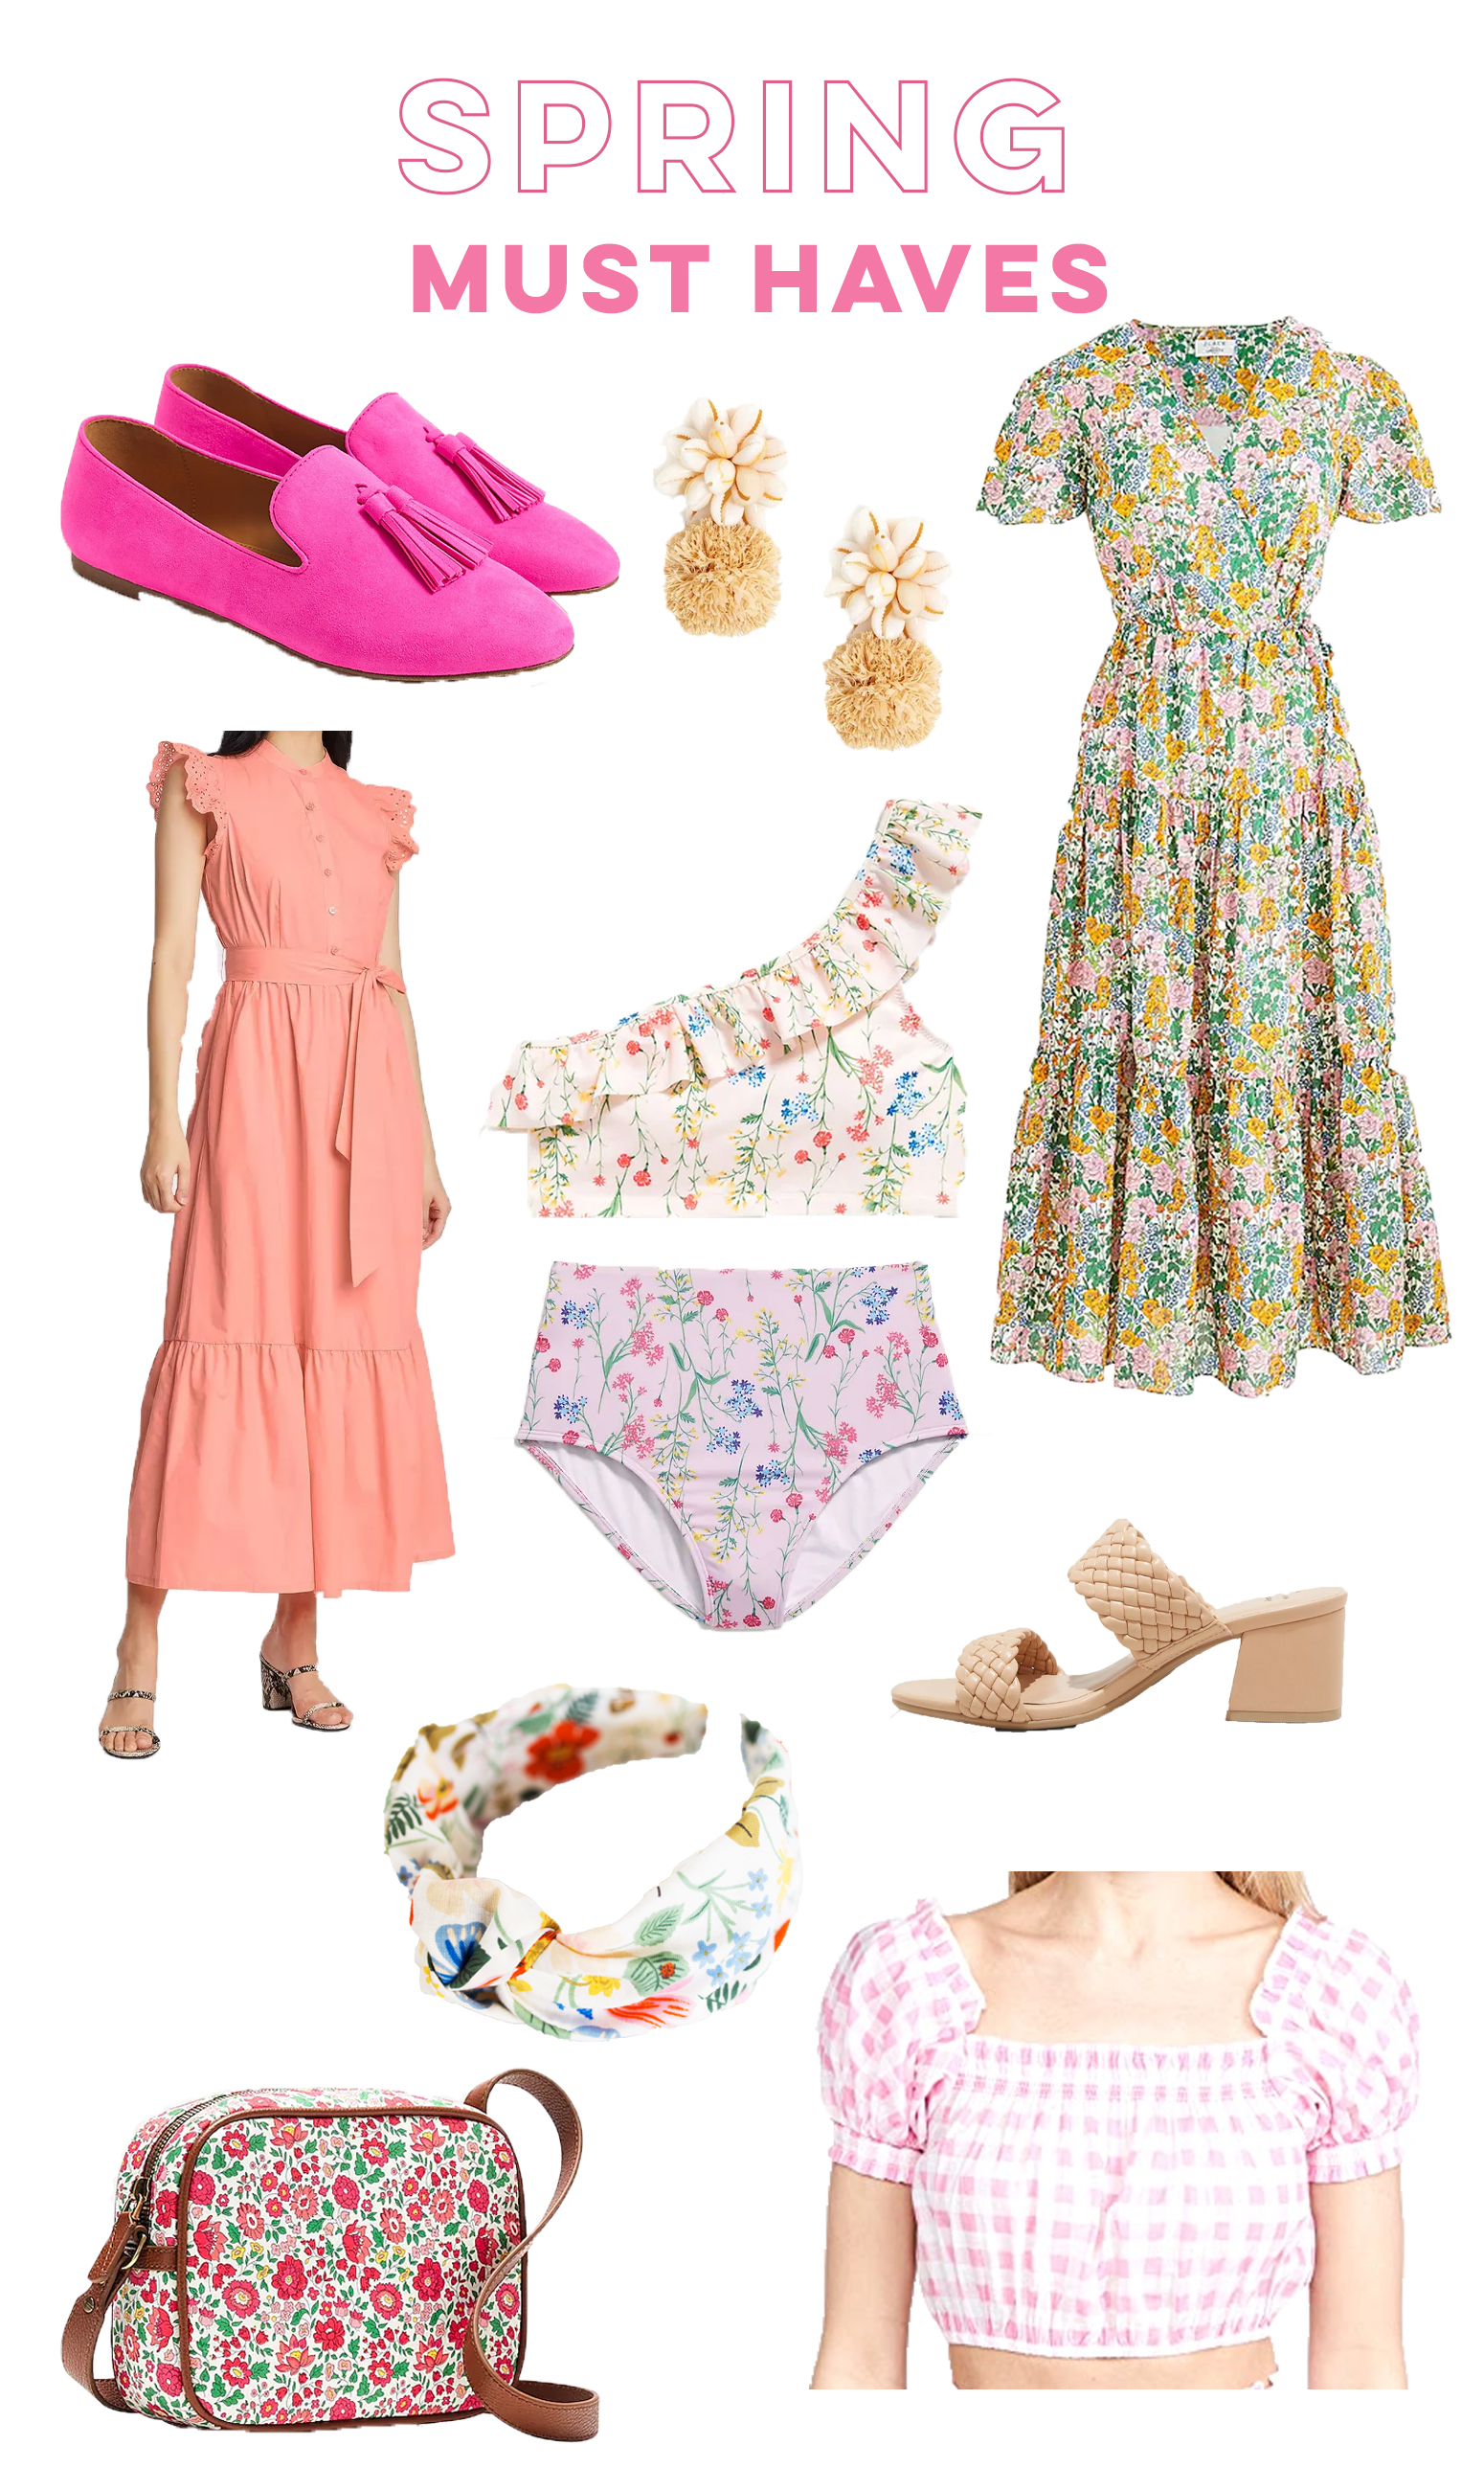 Spring Must Haves / What to Wear this Spring / Floral Dress / Floral Swimsuit / Top Knot Headband / Spring Outfit Inspiration - Sunshine Style, A Florida Based Fashion Blog by Katie